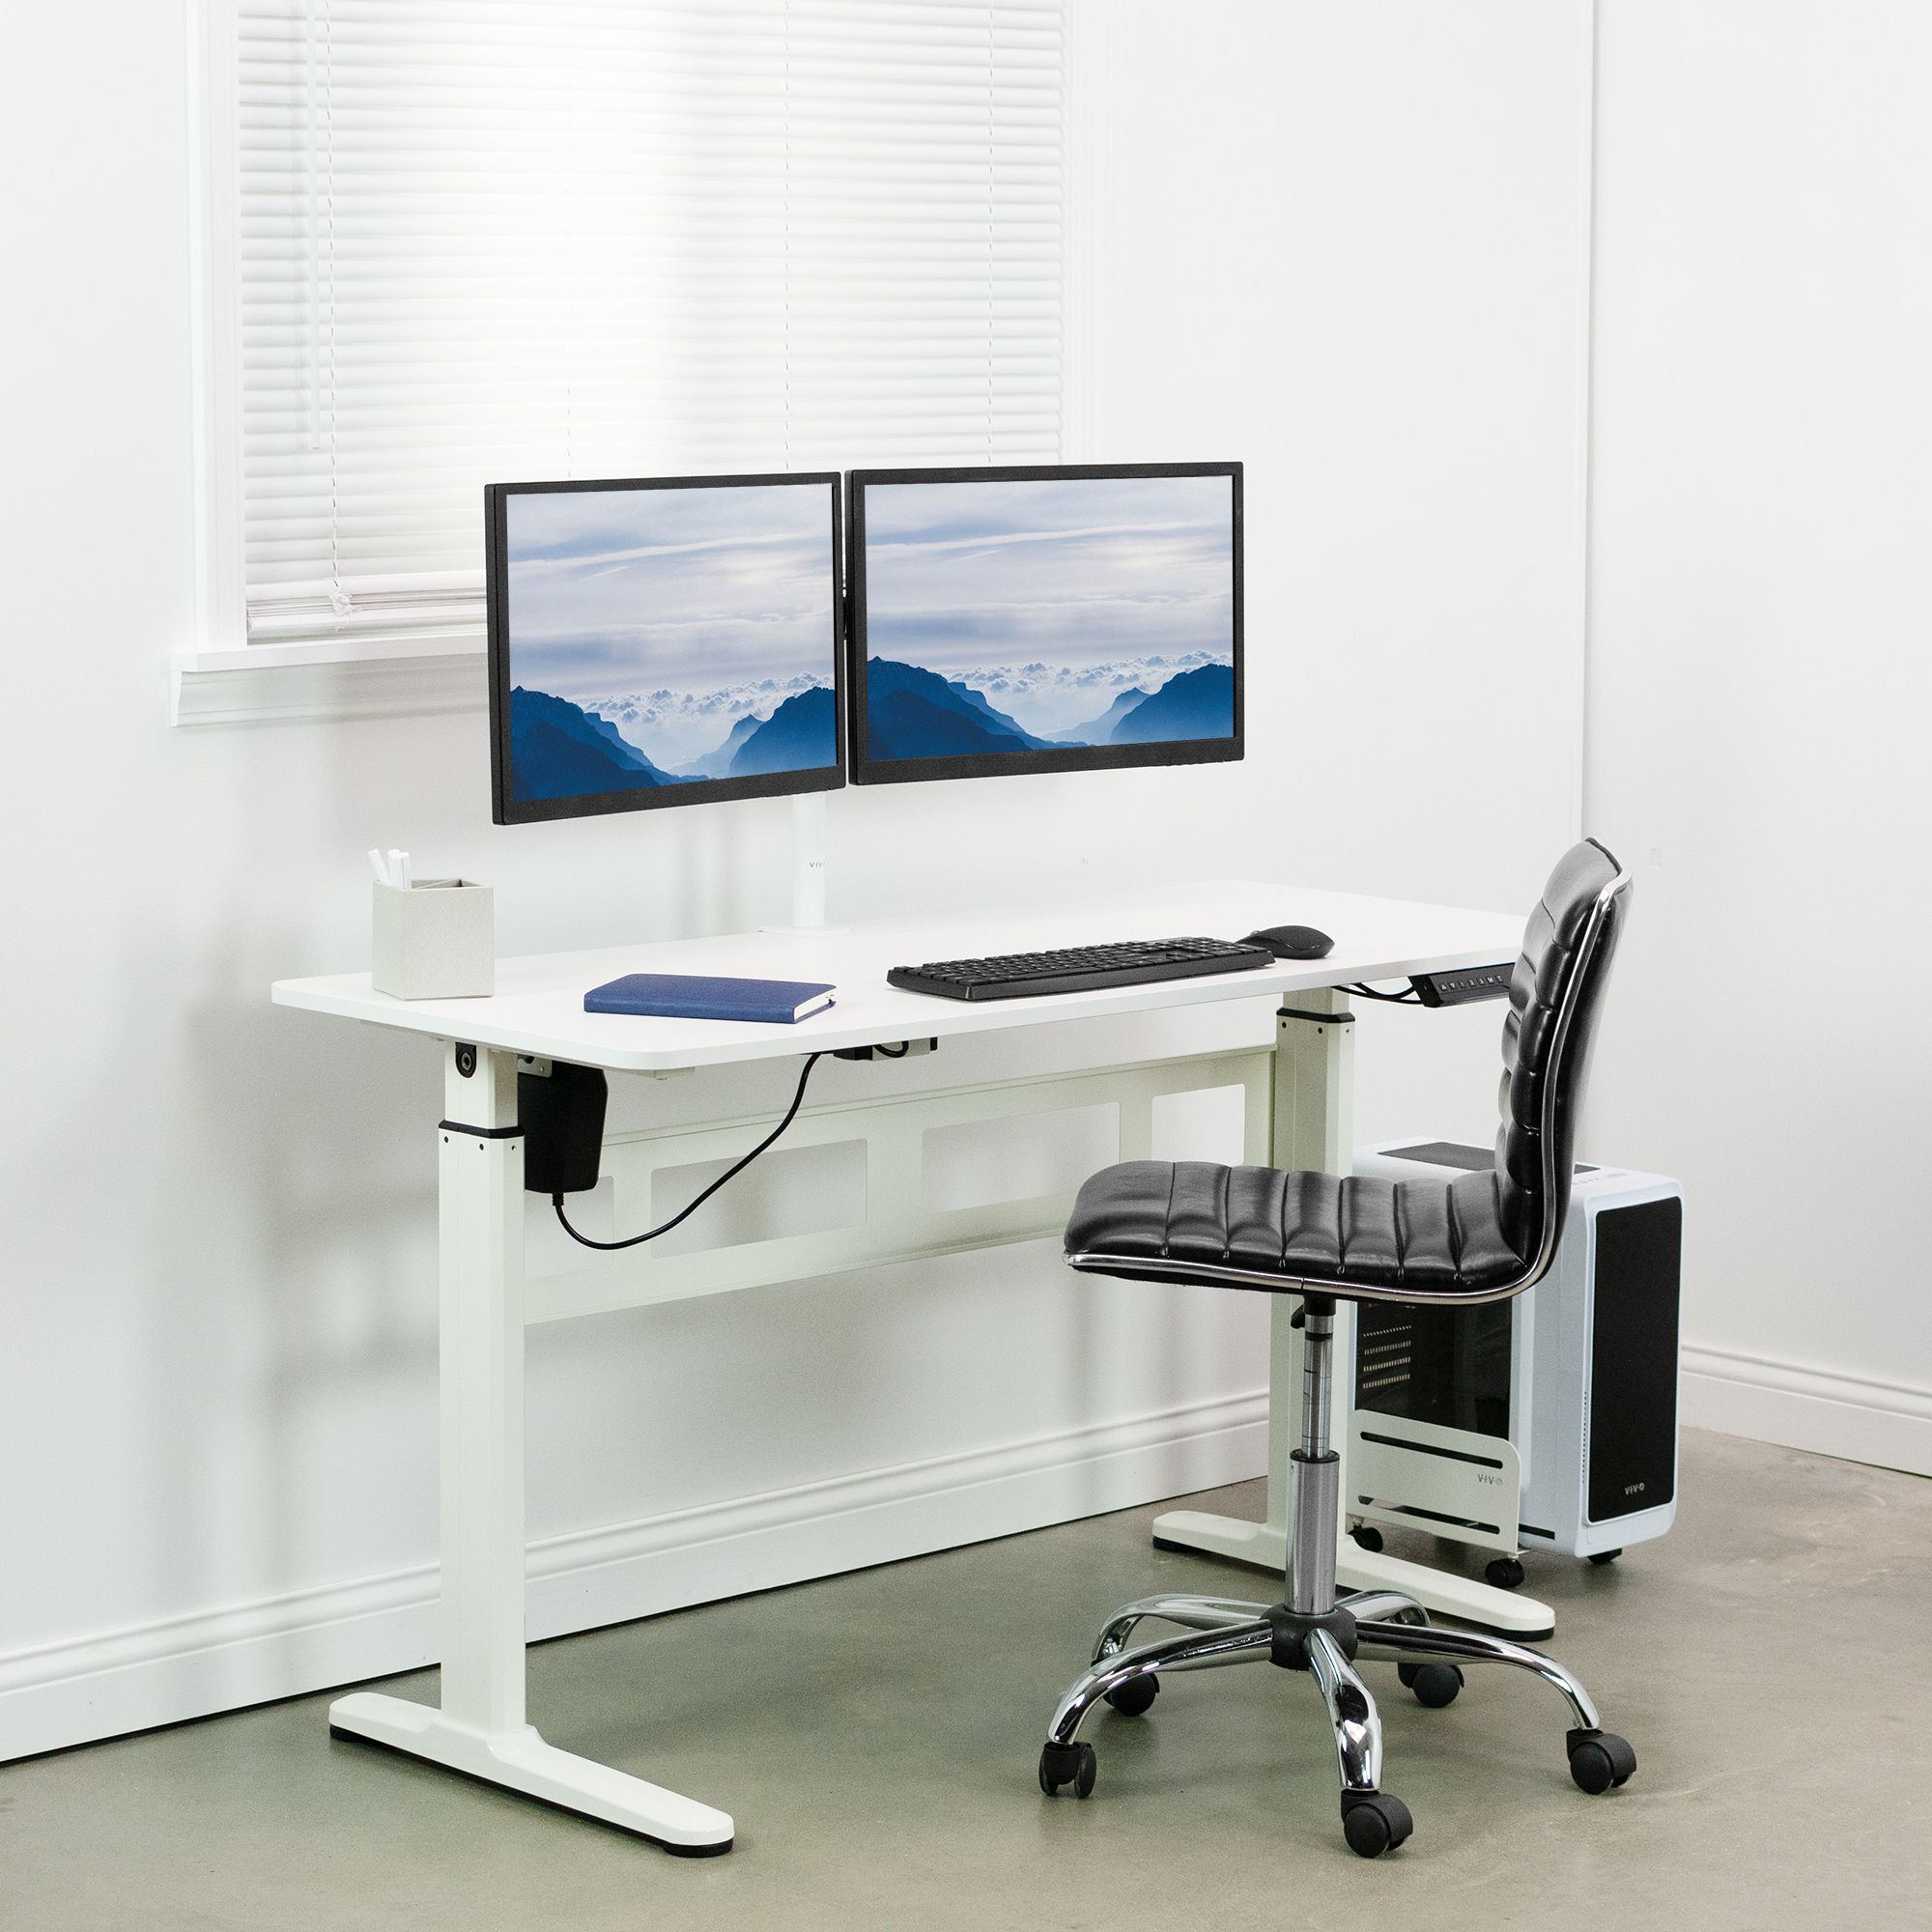 Vivo White 55"x 24" Electric Sit Stand Desk, Height Adjustable Within White Adjustable Stand Up Desks (View 4 of 15)